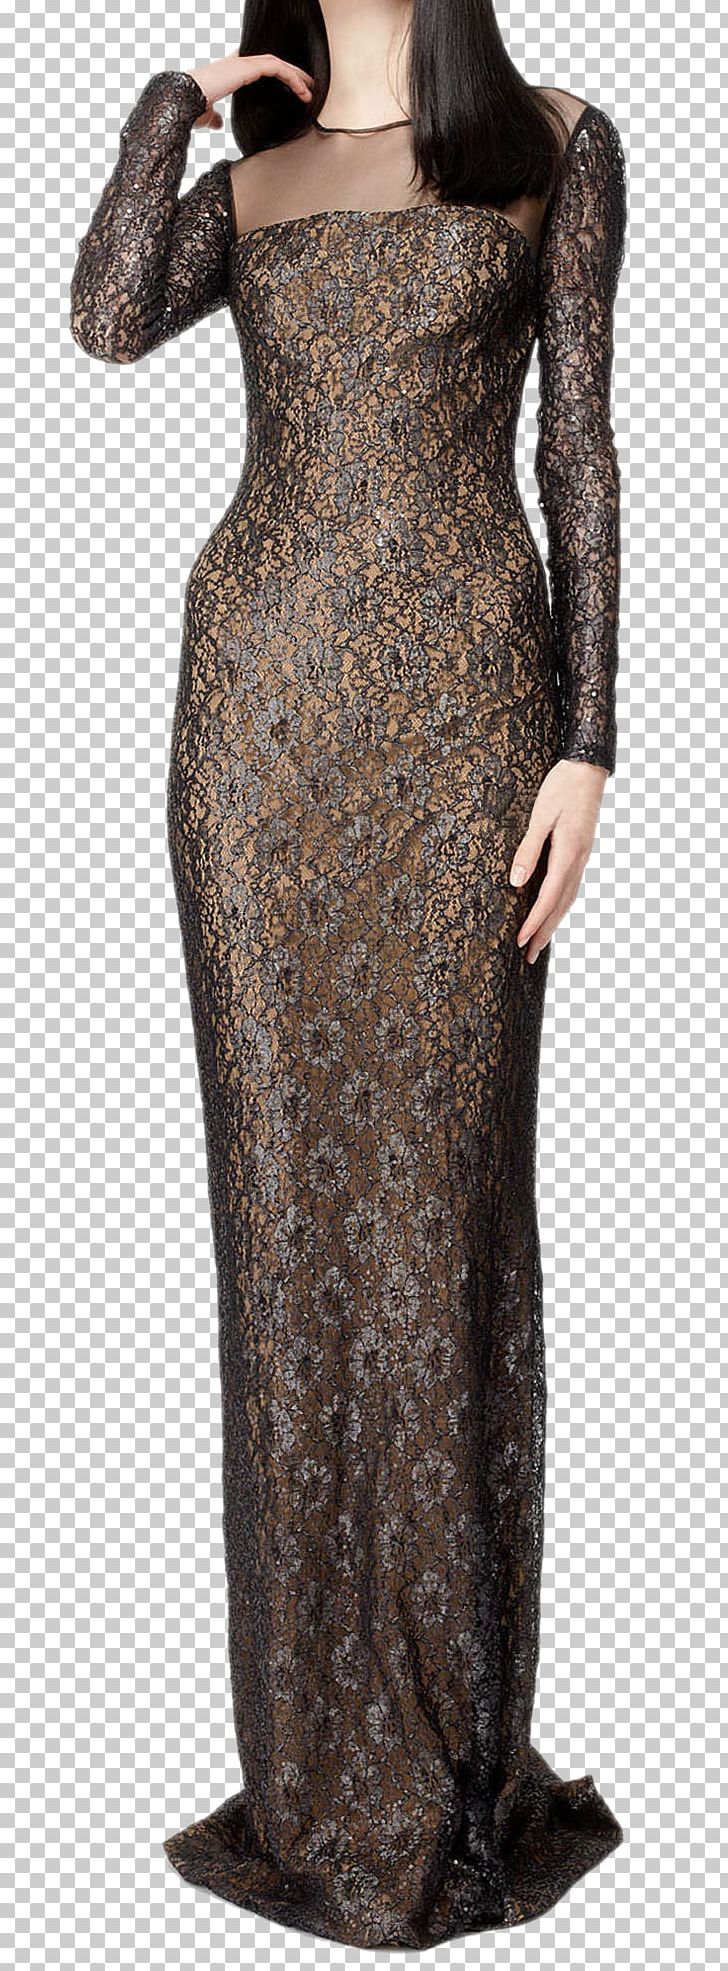 Gown Dress Clothing Ready-to-wear PNG, Clipart, Cocktail Dress, Day Dress, Designer, Dress, Dress Shirt Free PNG Download